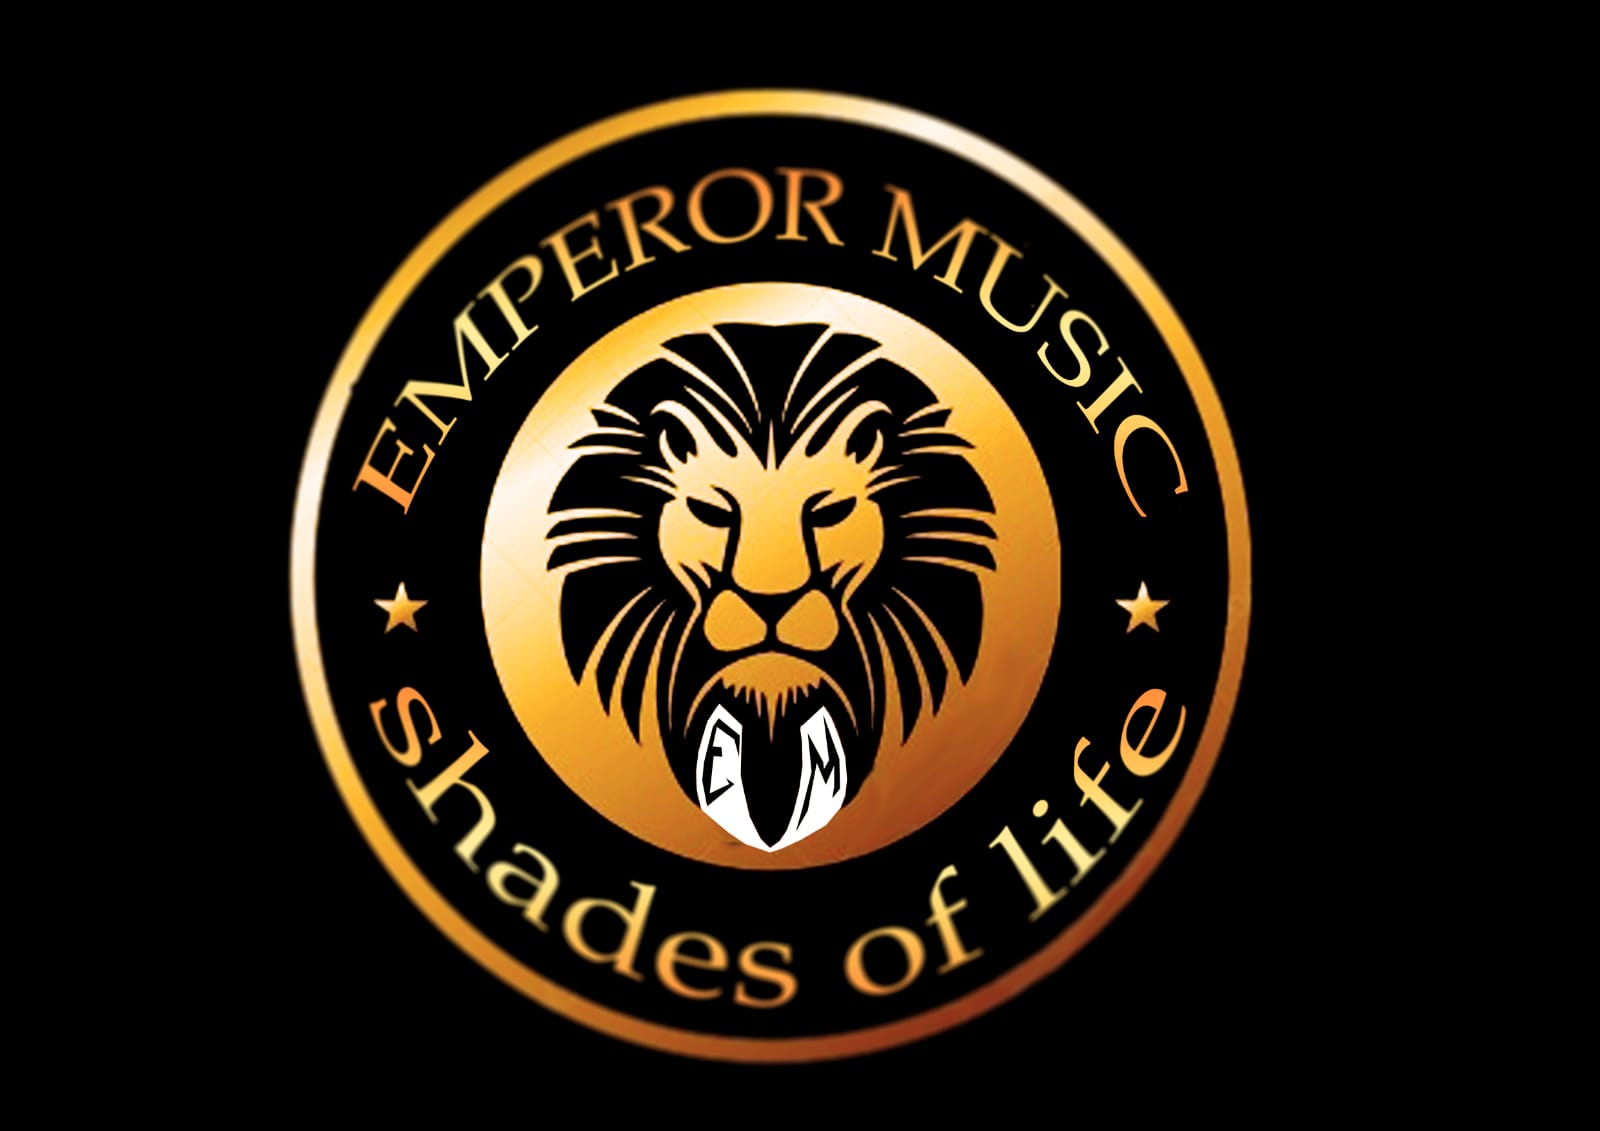 emperor music shades of life